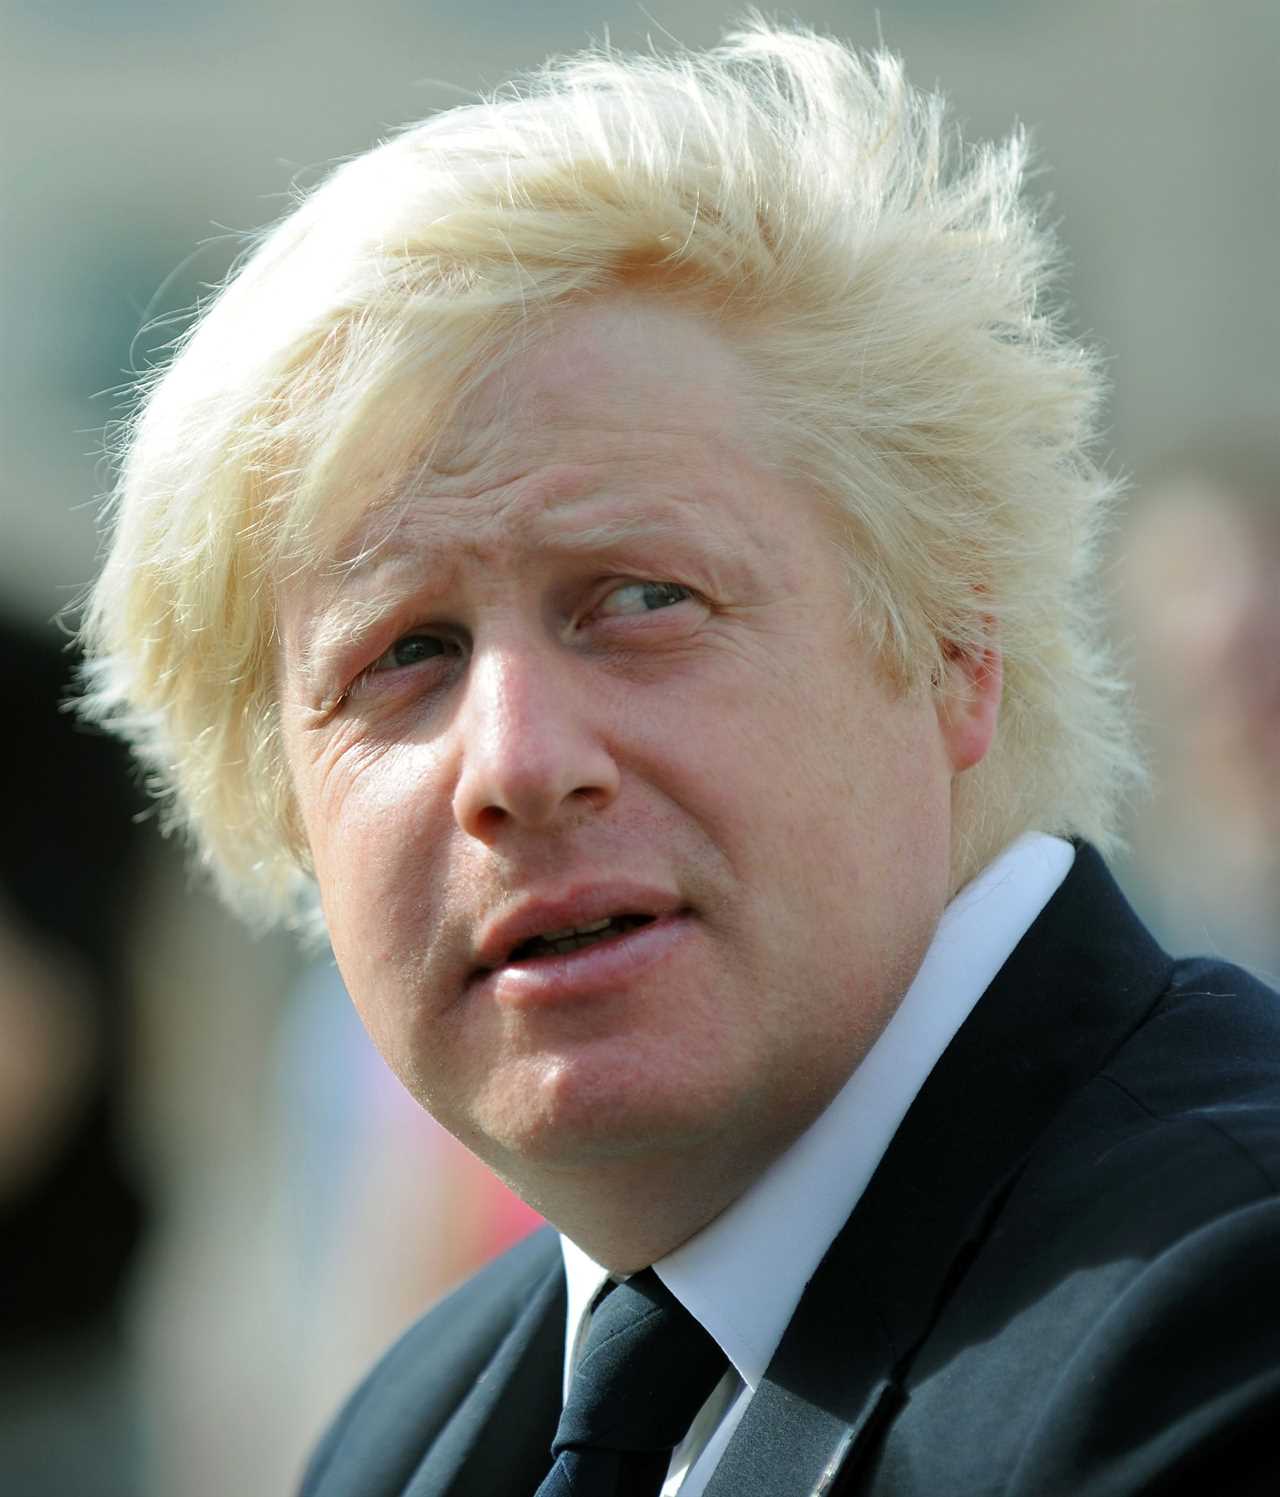 Boris Johnson’s son Wilf has inherited his father’s infamous wild hairdo – which spills over the top of his pushchair